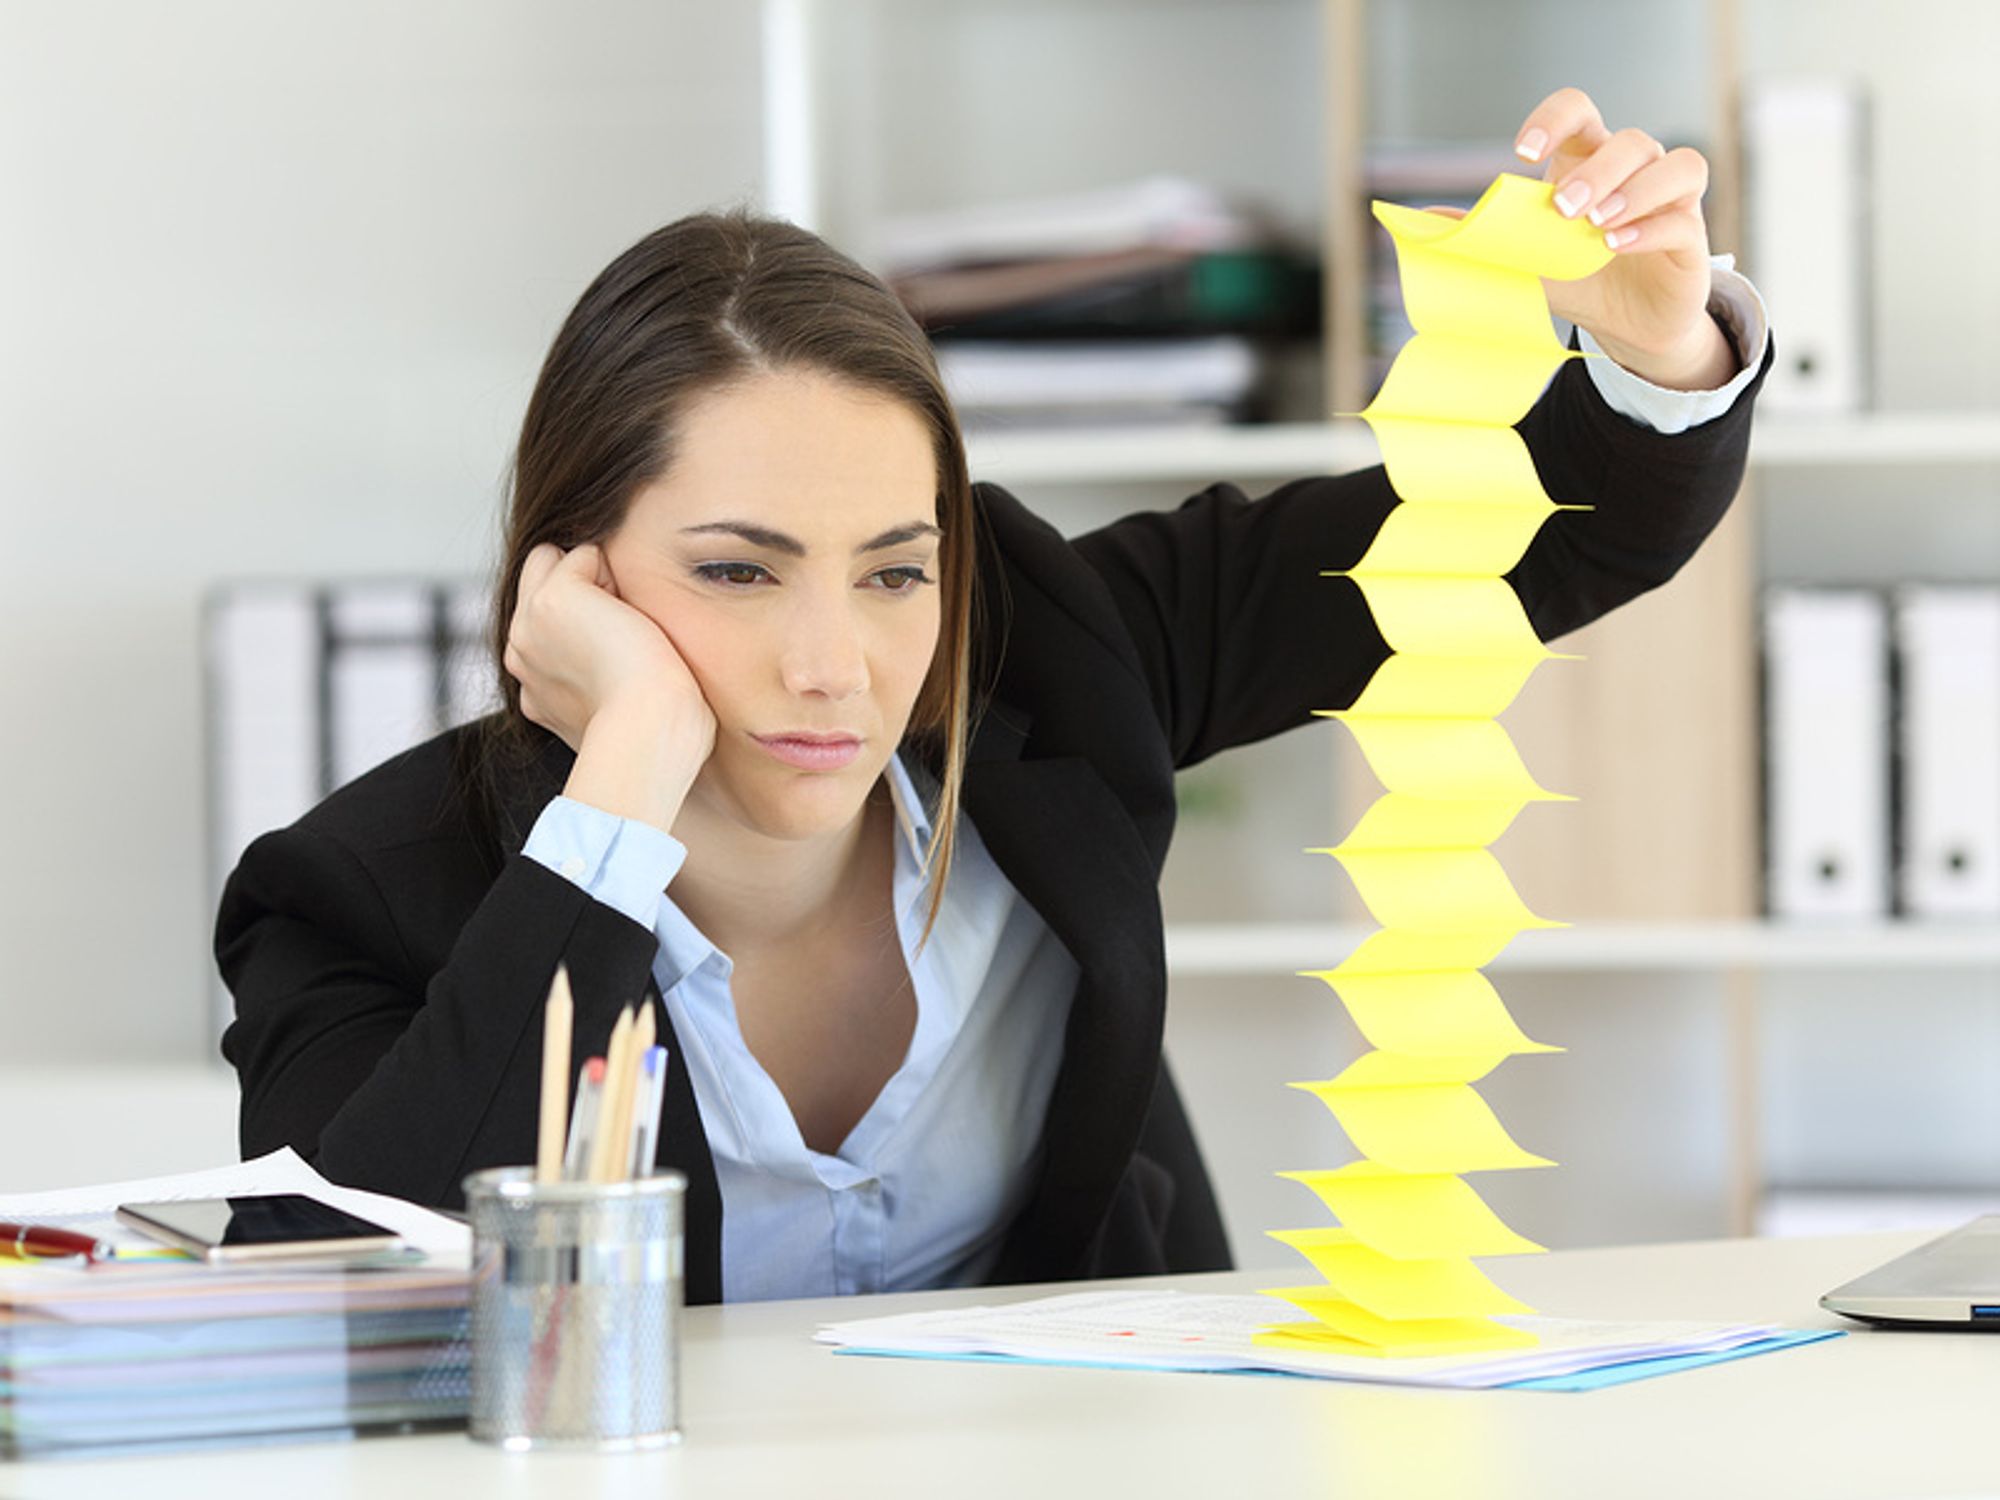 Professional woman feeling unmotivated at work and playing with sticky notes at her desk.